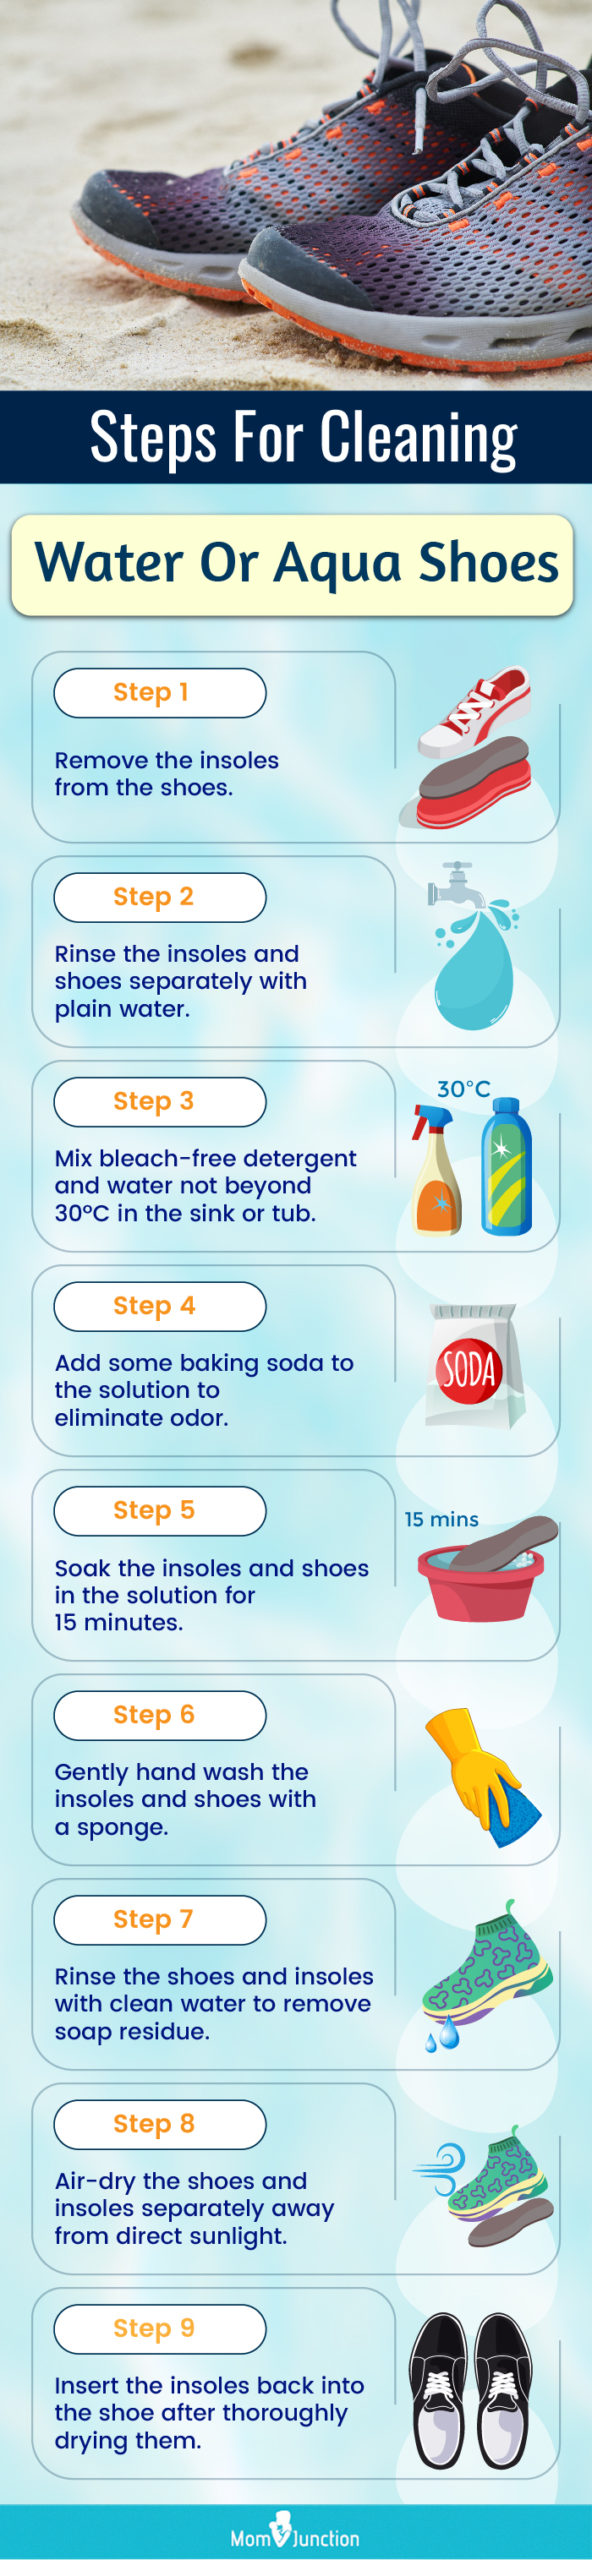 Steps For Cleaning Water Or Aqua Shoes (infographic)